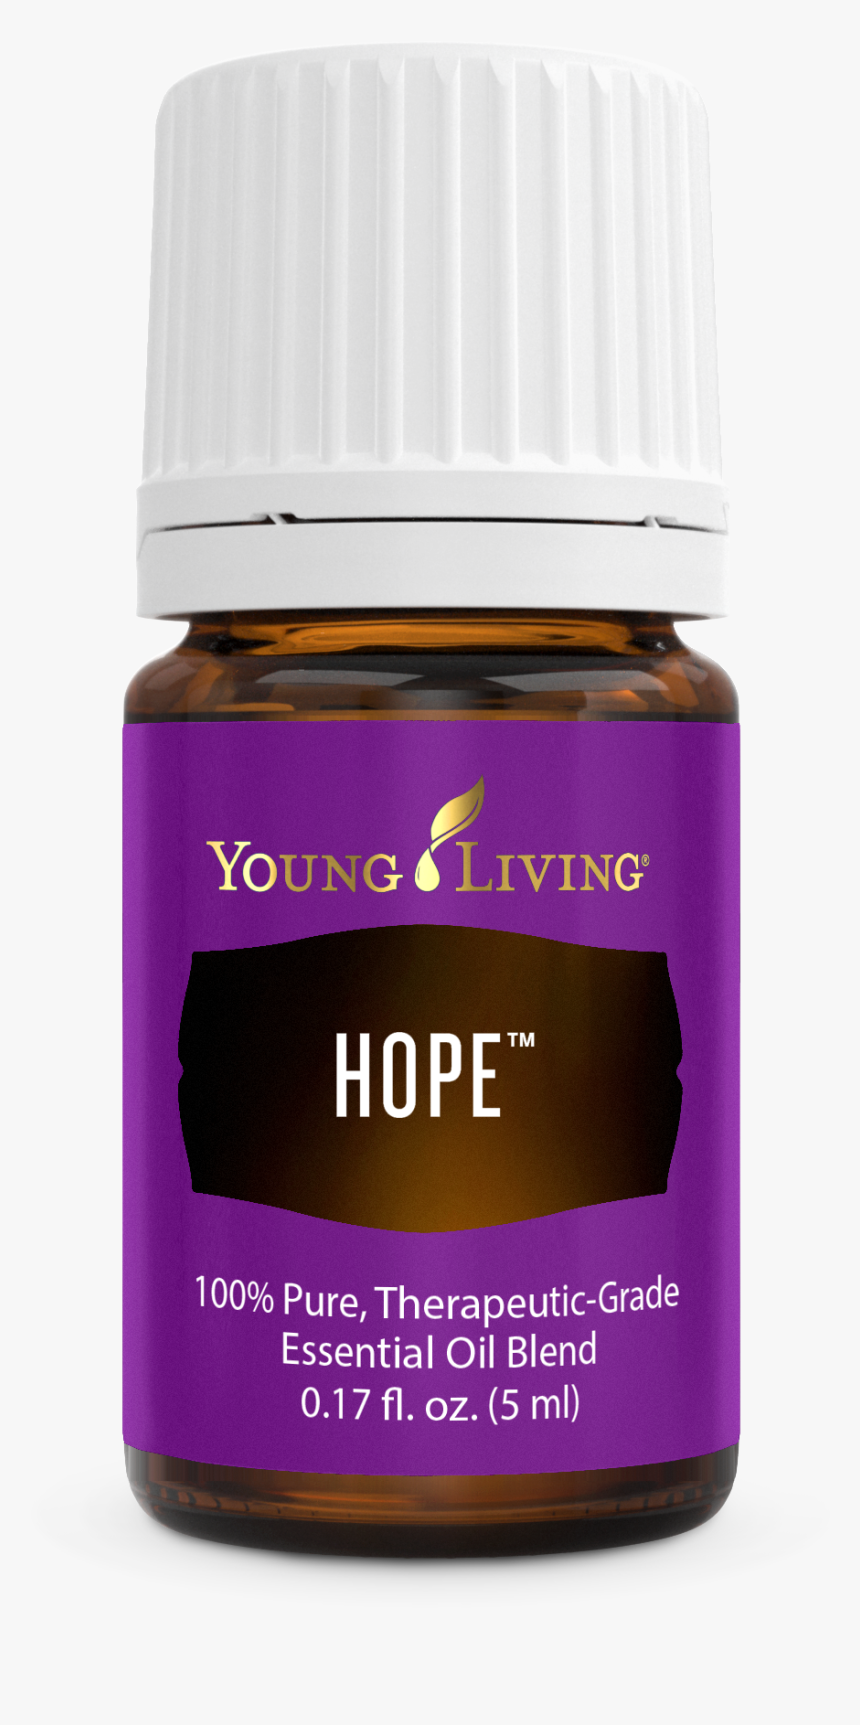 Hope Essential Oil Blend - Young Living Essential Oil Png Transparent, Png Download, Free Download